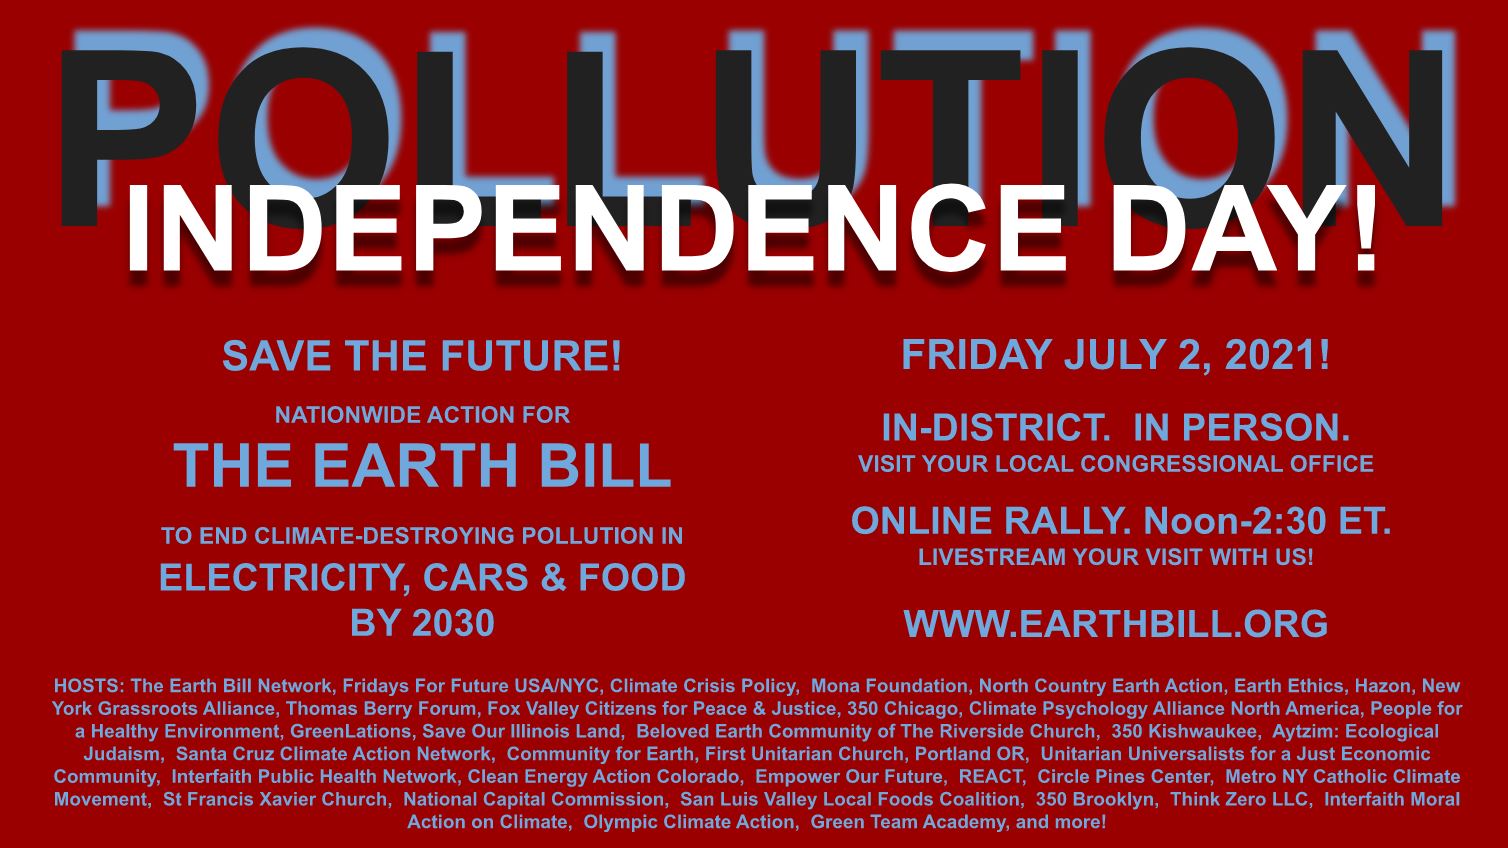 Pollution independence day! Save the future. Nationwide action for the Earth Bill to end climate-destroying pollution in electricity, cars, and food by 2030. Friday July 2, 2021!